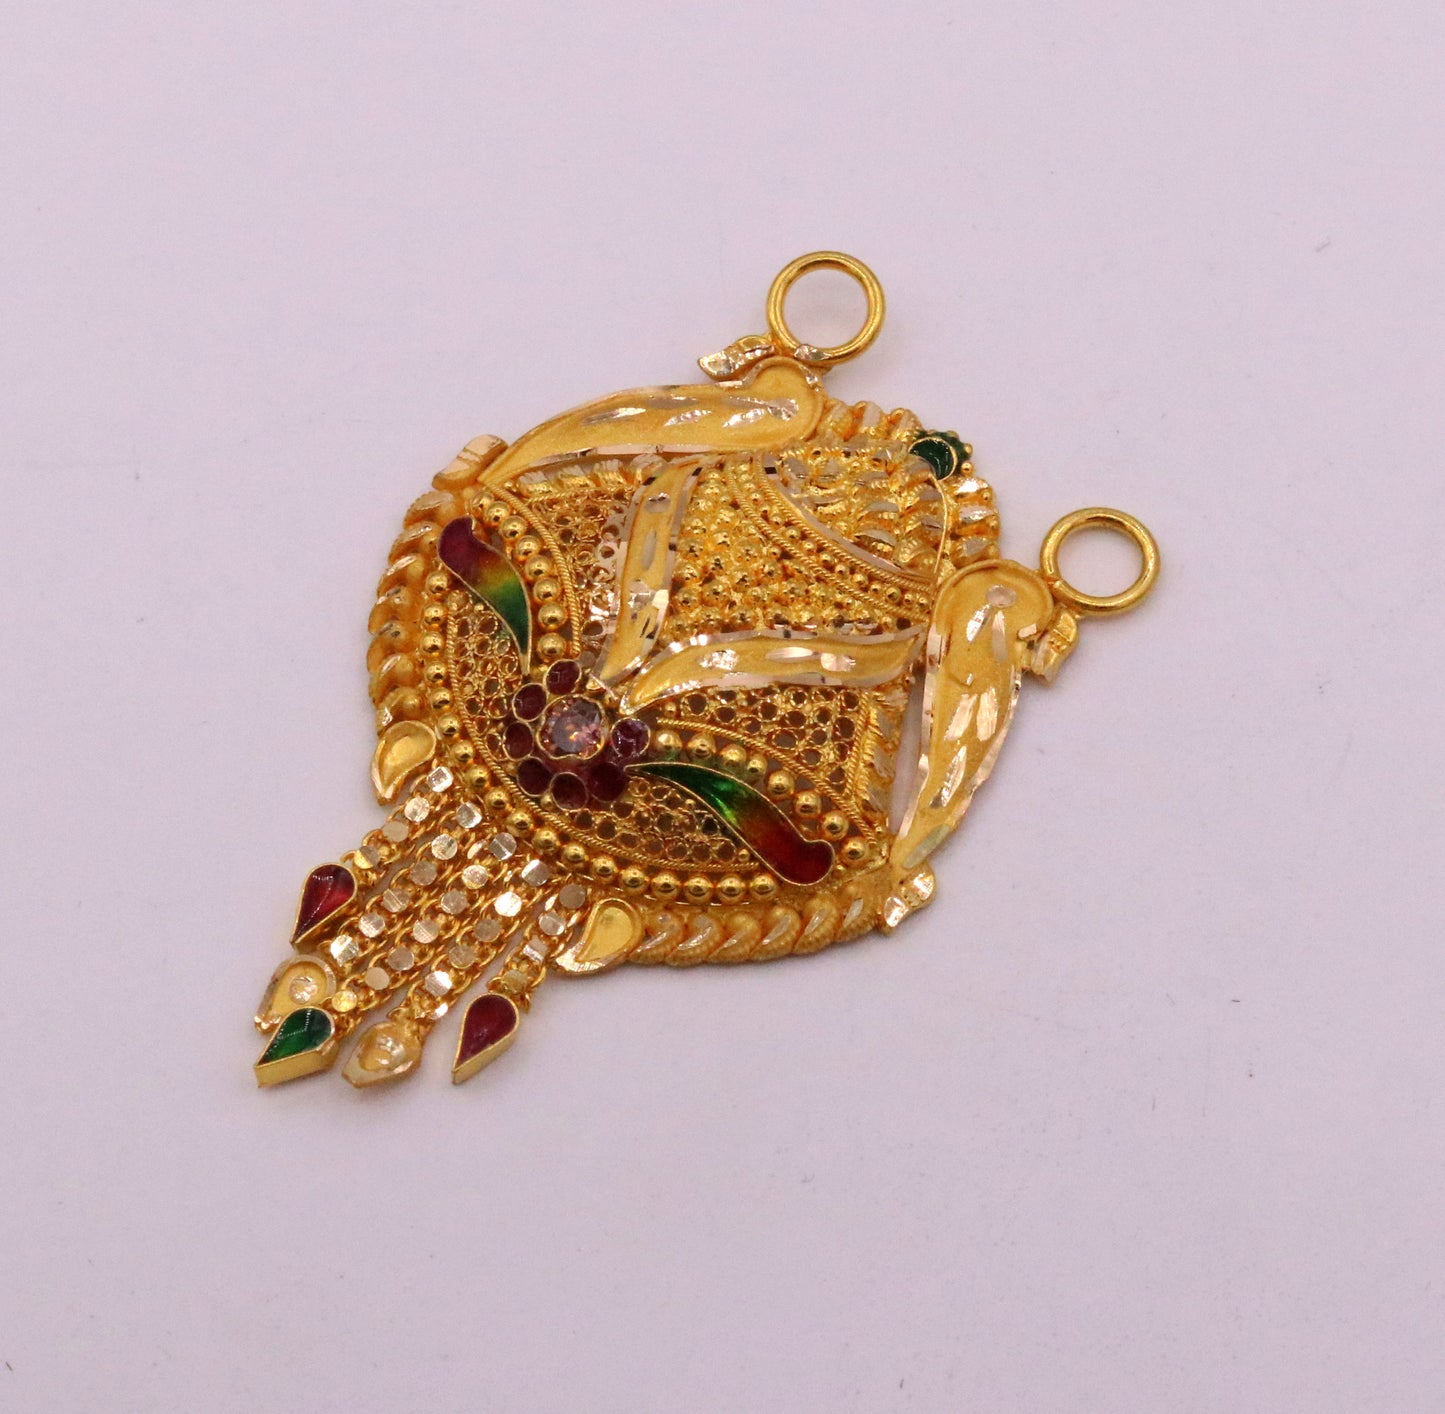 Genuine certified 22kt yellow gold solid filigree work meenakari work pendant necklace traditional art of indian tribal jewelry gp12 - TRIBAL ORNAMENTS